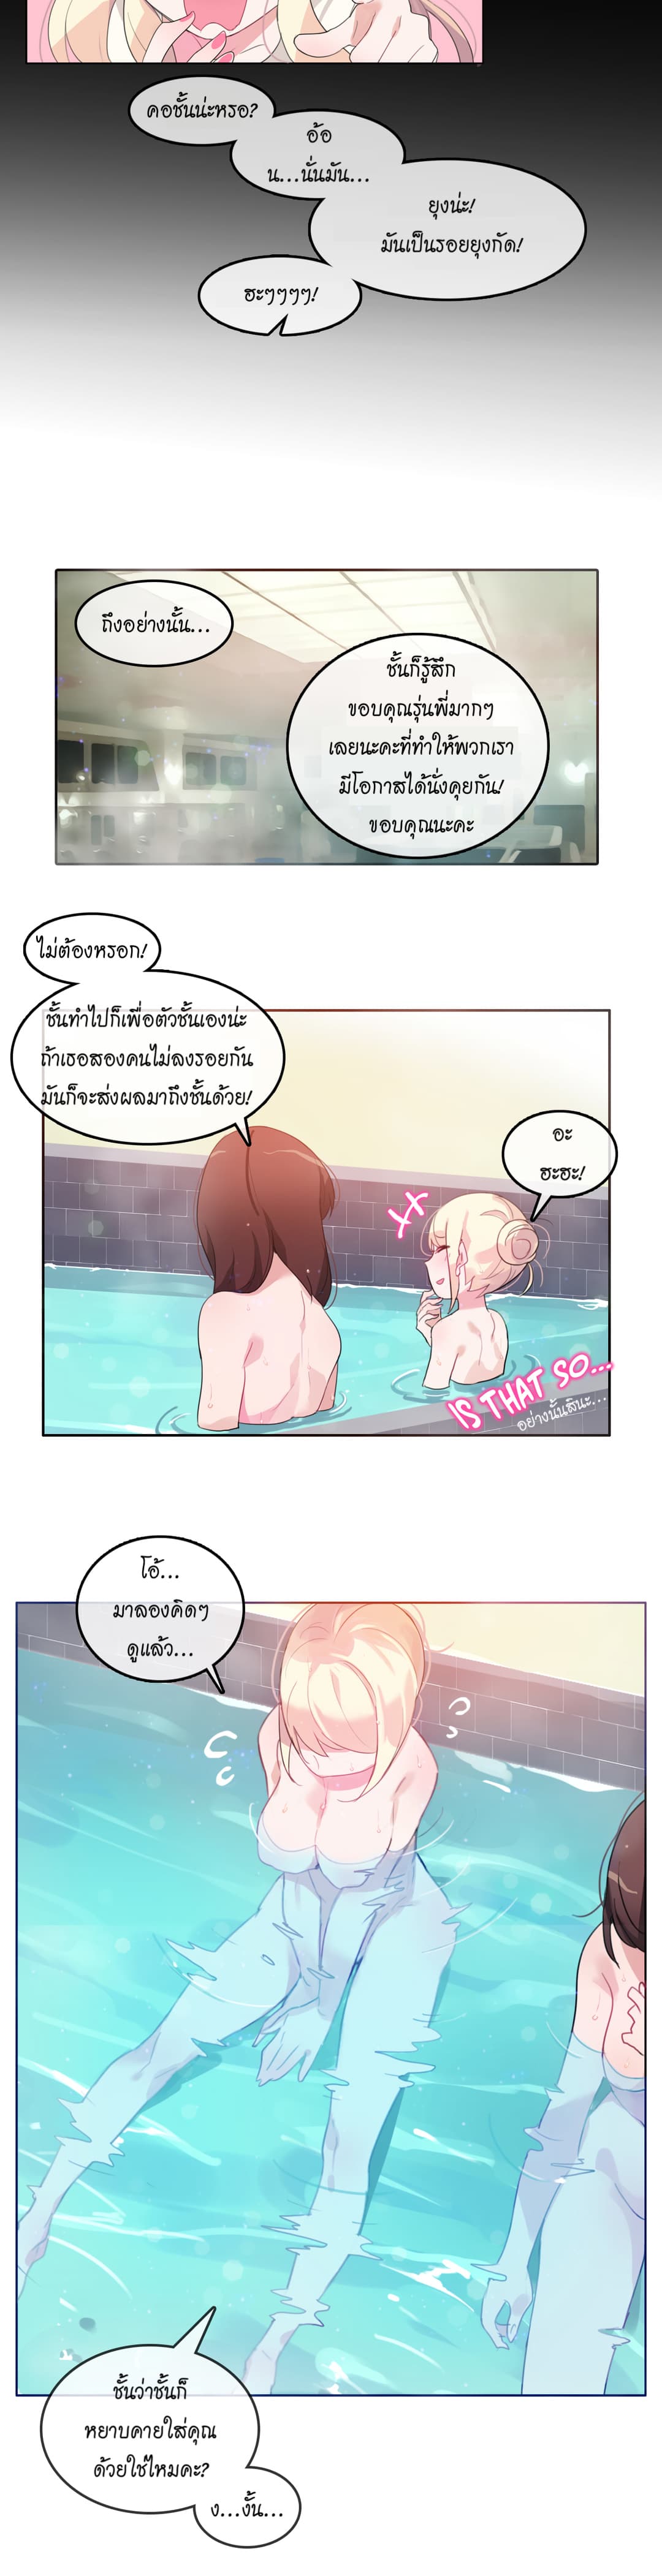 A Pervert’s Daily Life 12 (14)